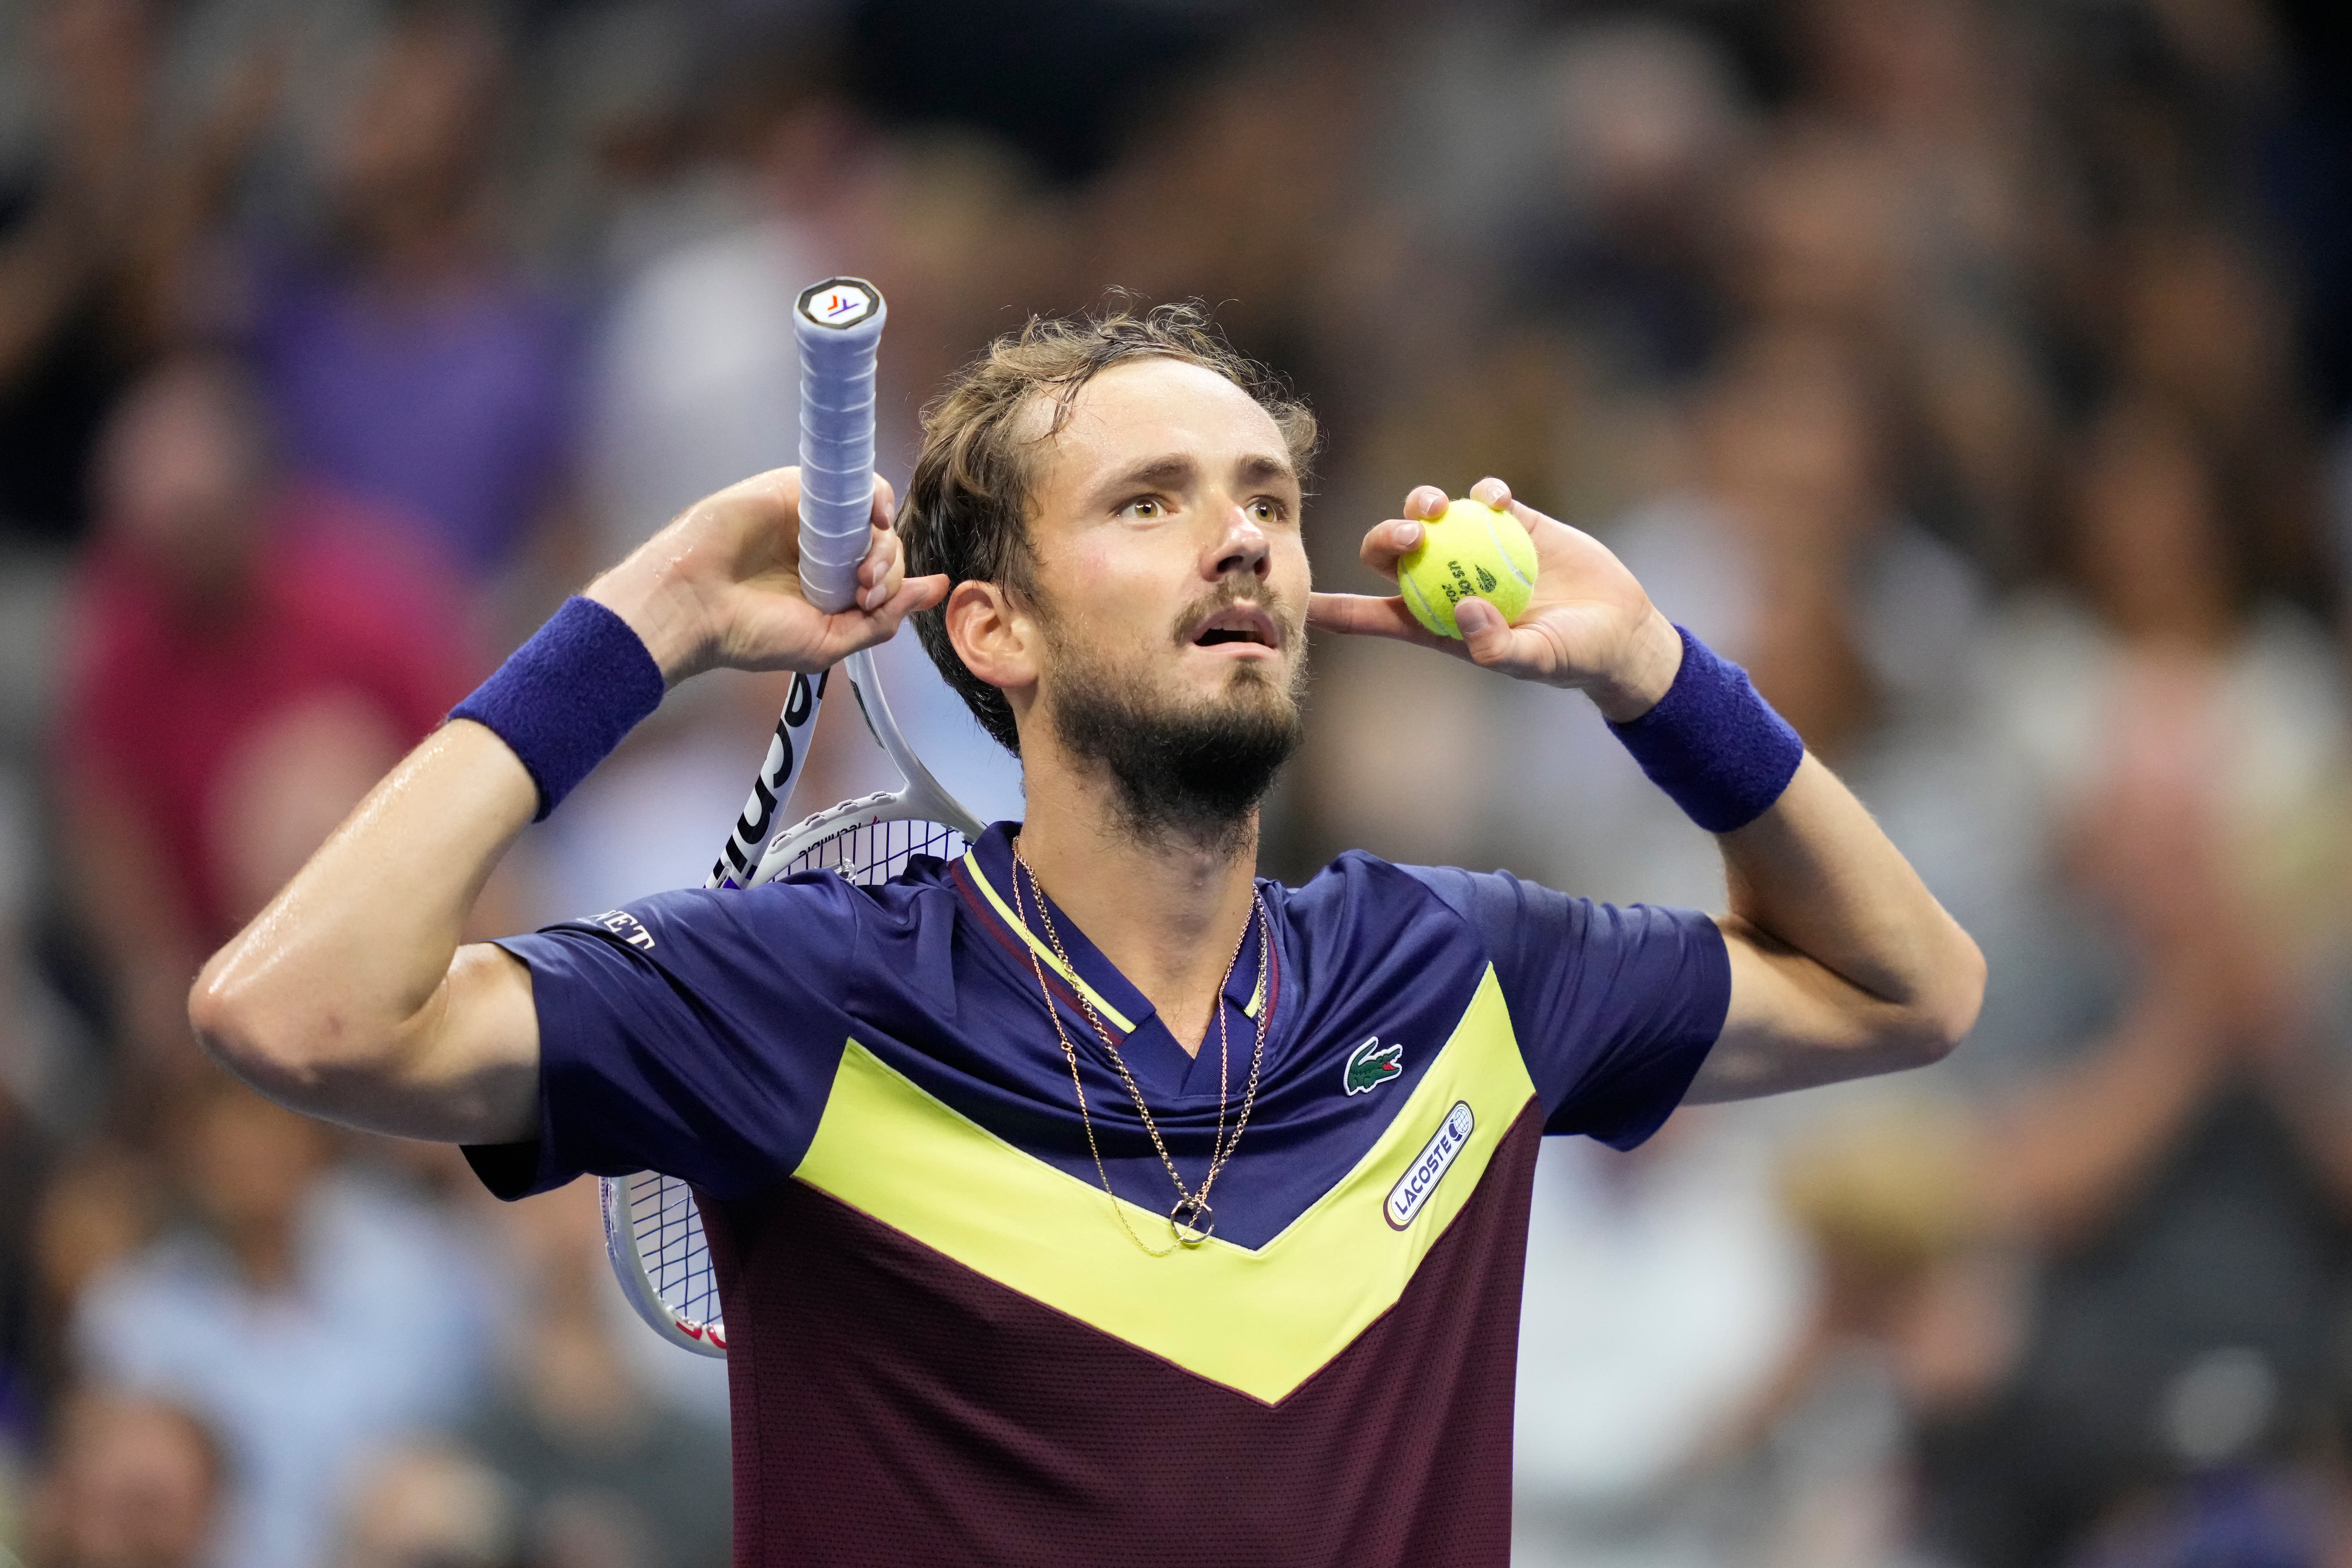 Daniil Medvedev upsets Carlos Alcaraz to set up rematch of 2021 US Open final The Independent